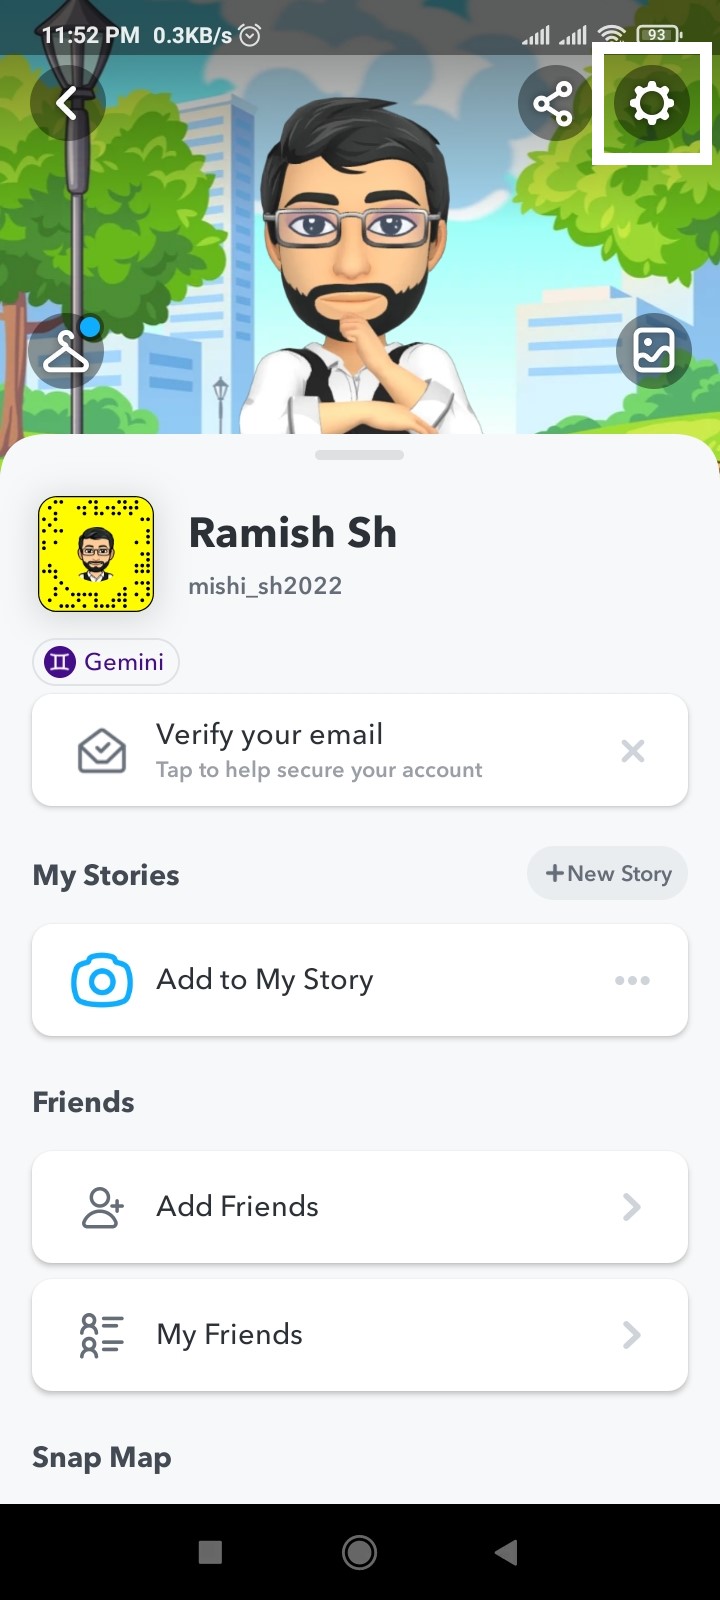 How To Fix Snapchat Not Loading Snaps On Android? Black Screen?